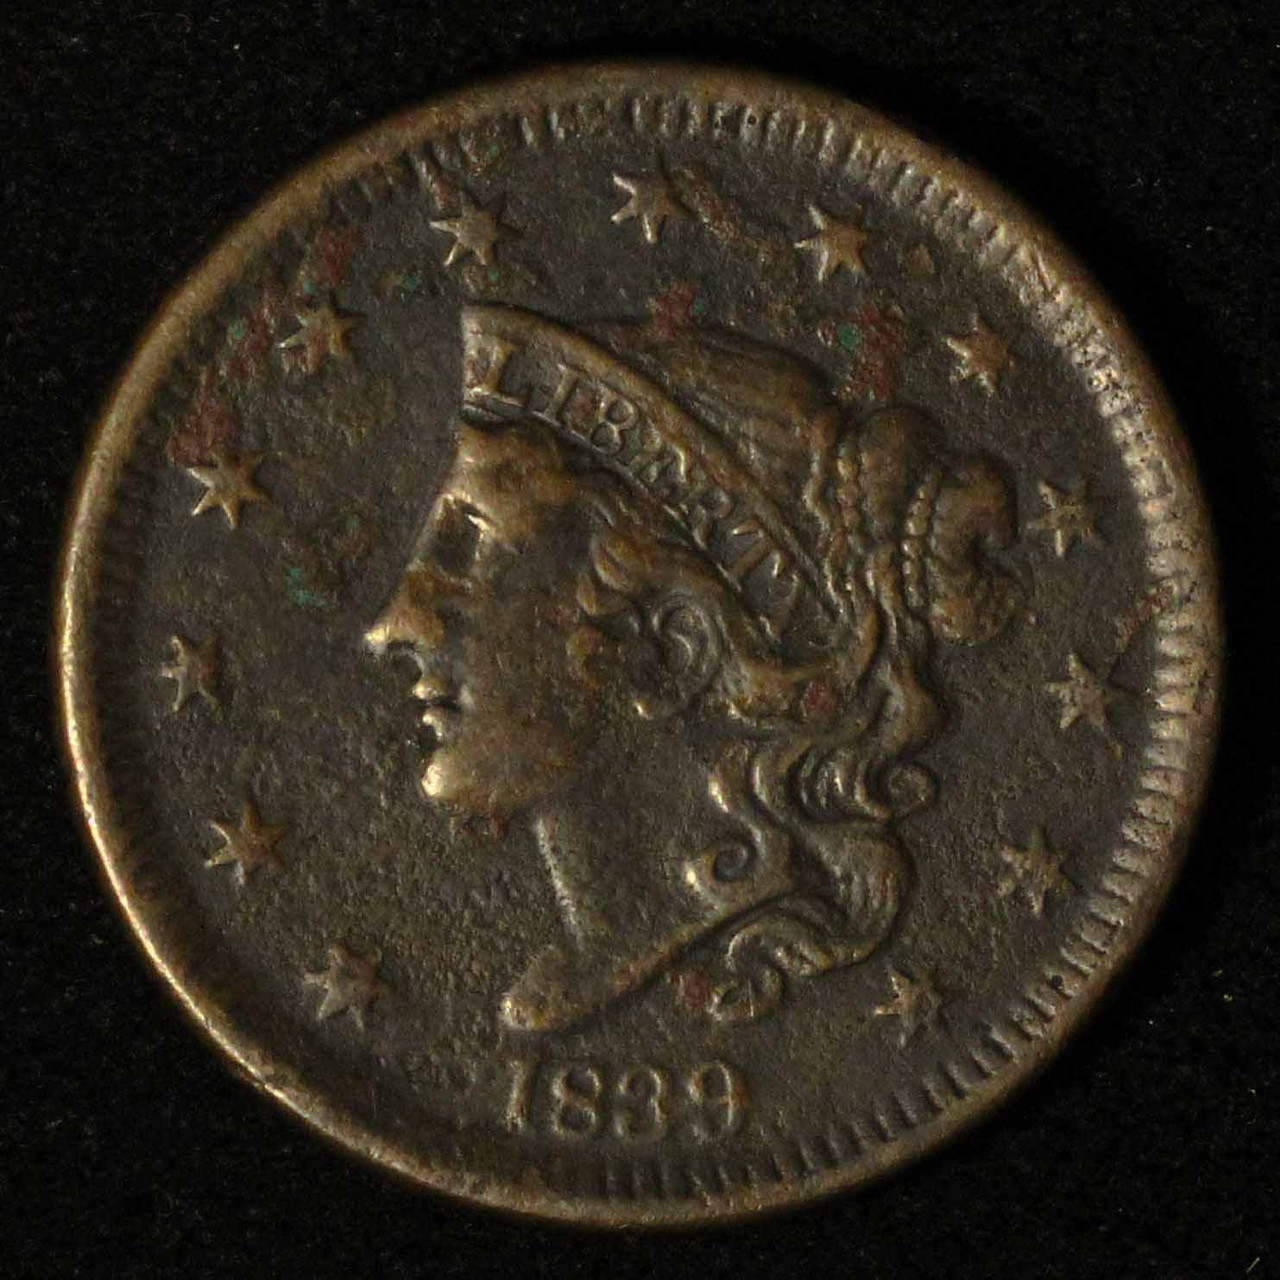 1839 1c Coronet Head Large Cent - Free Shipping USA - The Happy Coin